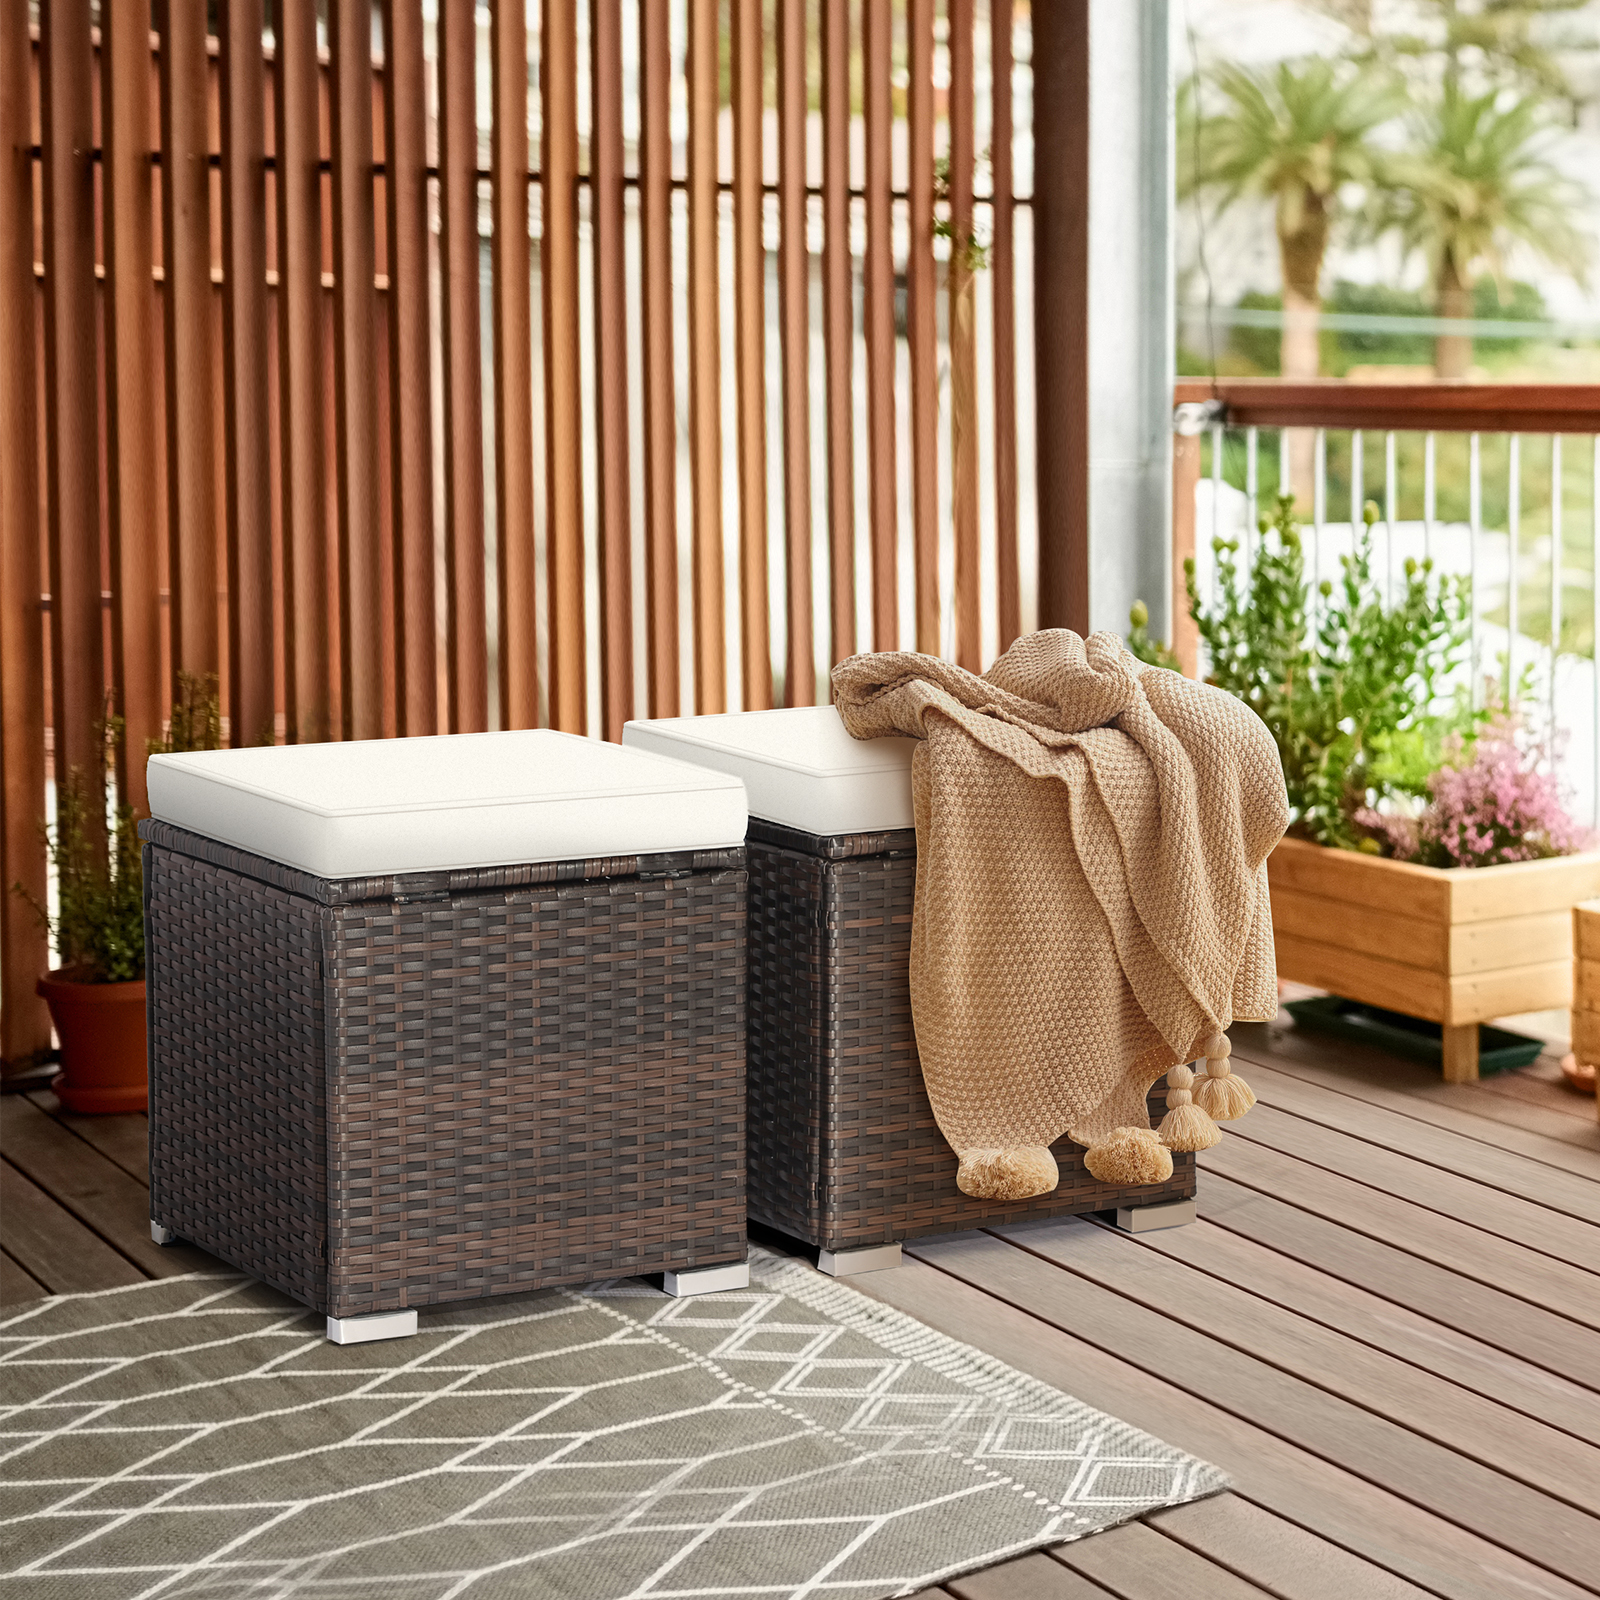 Topbuy 2 Pieces Patio Ottoman Multipurpose Outdoor Wicker Footstool Storage Box Side Table w/ Solid Metal Frame w/ Removable Cushions Off White - image 2 of 7